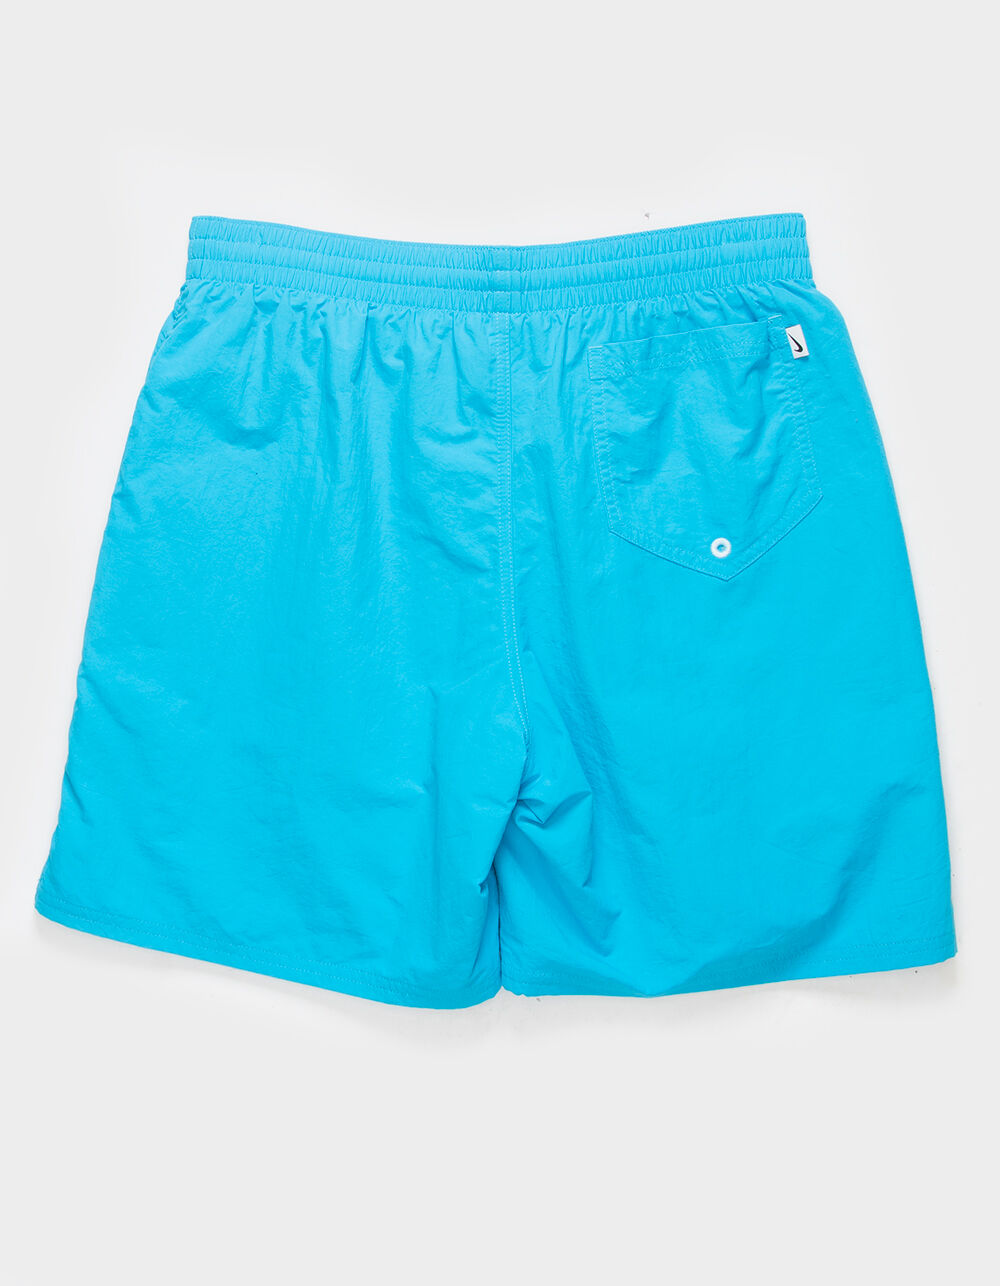 NIKE Icon Solid Mens Volley Swim Trunks - BLUE | Tillys